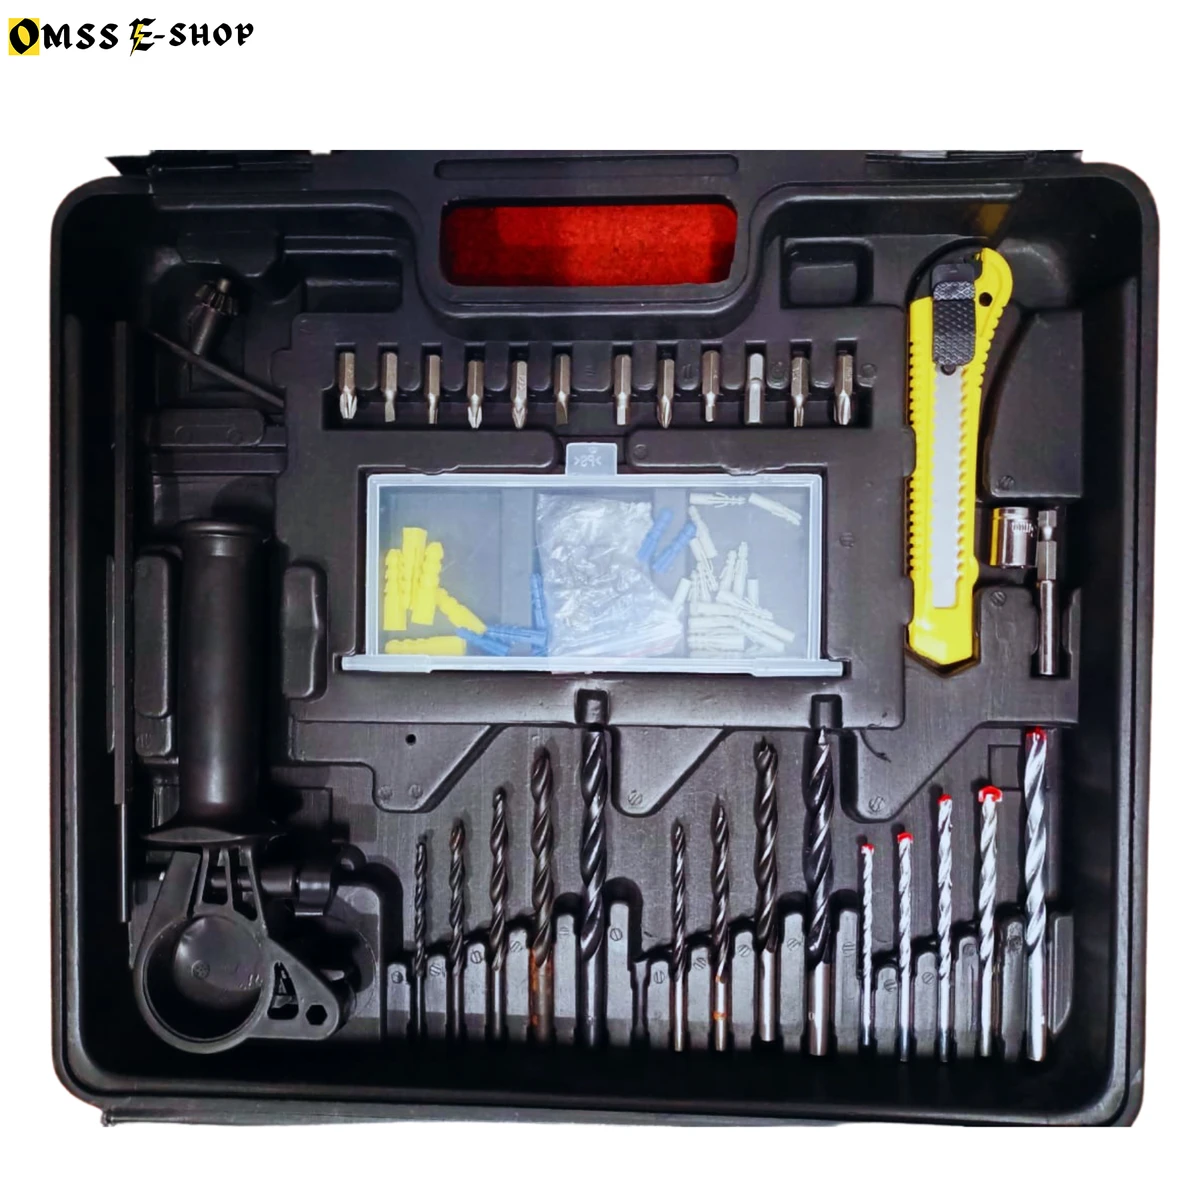 Professional Electric Drill Tool Kit with 10mm (500Watt) Heavy duty Impact Drill Machine (100 pcs Accessory set) RP-2450DH-AM